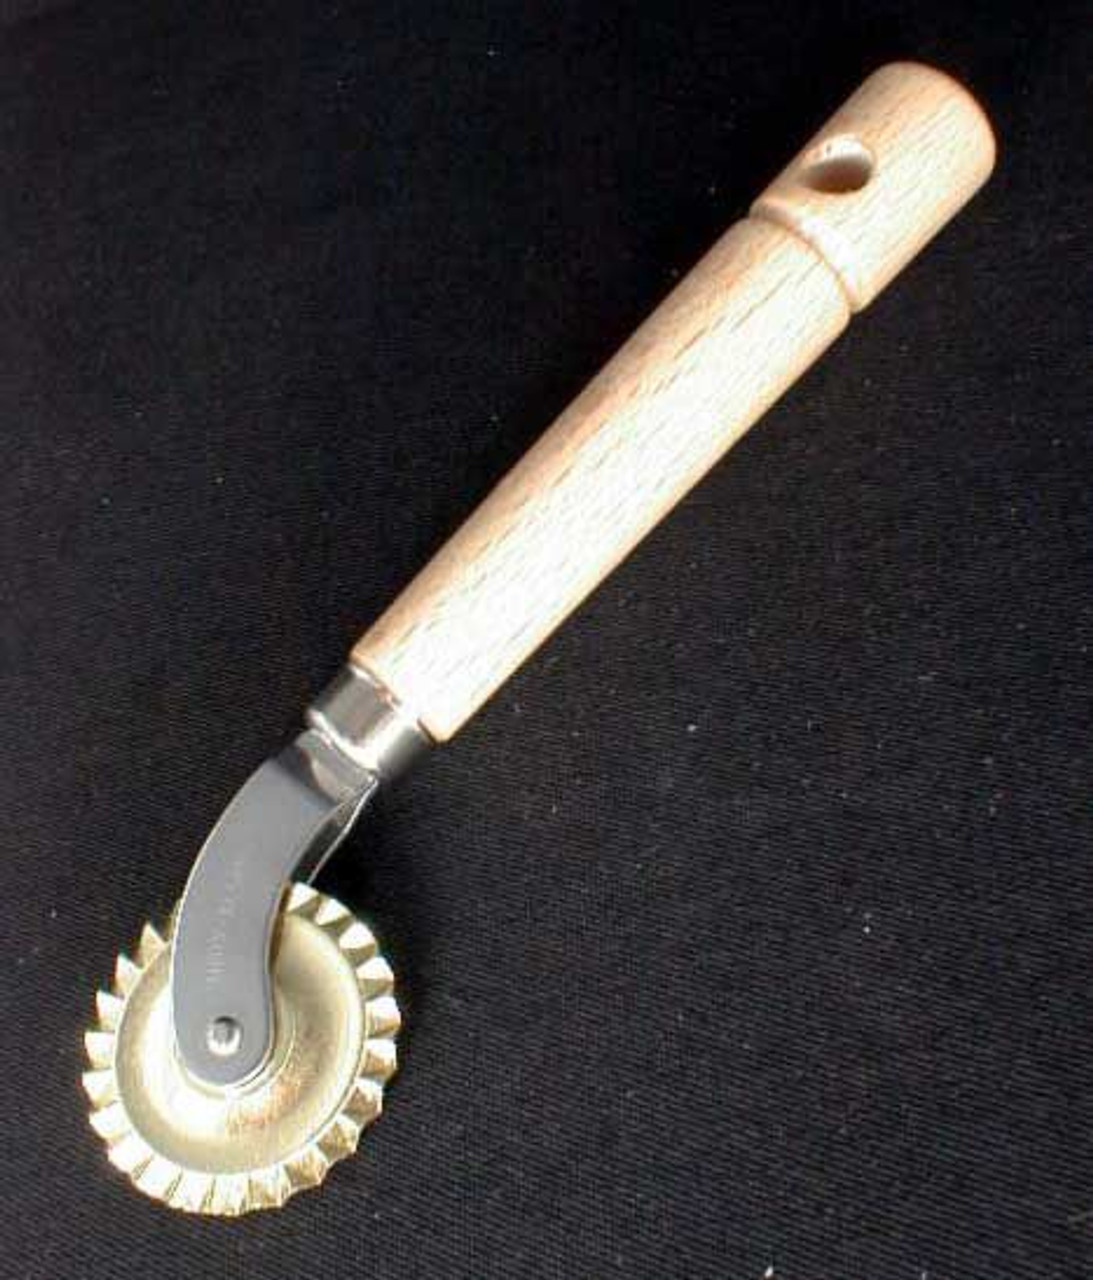 Pastry Wheel Cutter, Fluted Pastry Wheel, Ravioli Crimper Cutter